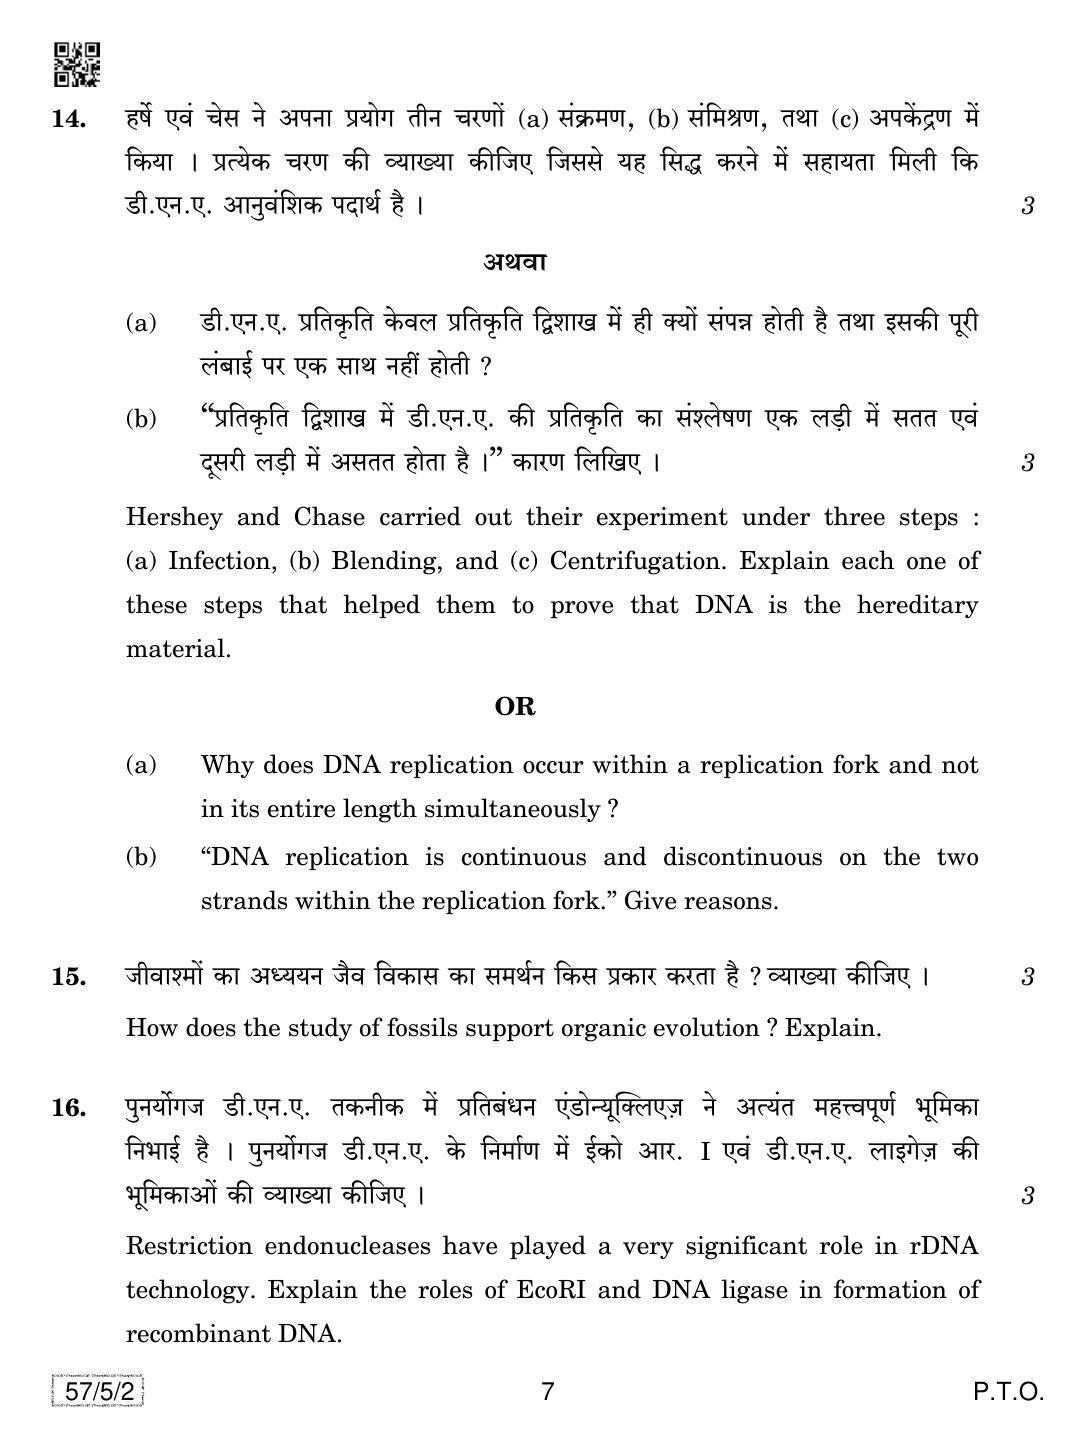 CBSE Class 12 57-5-2 Biology 2019 Question Paper - Page 7